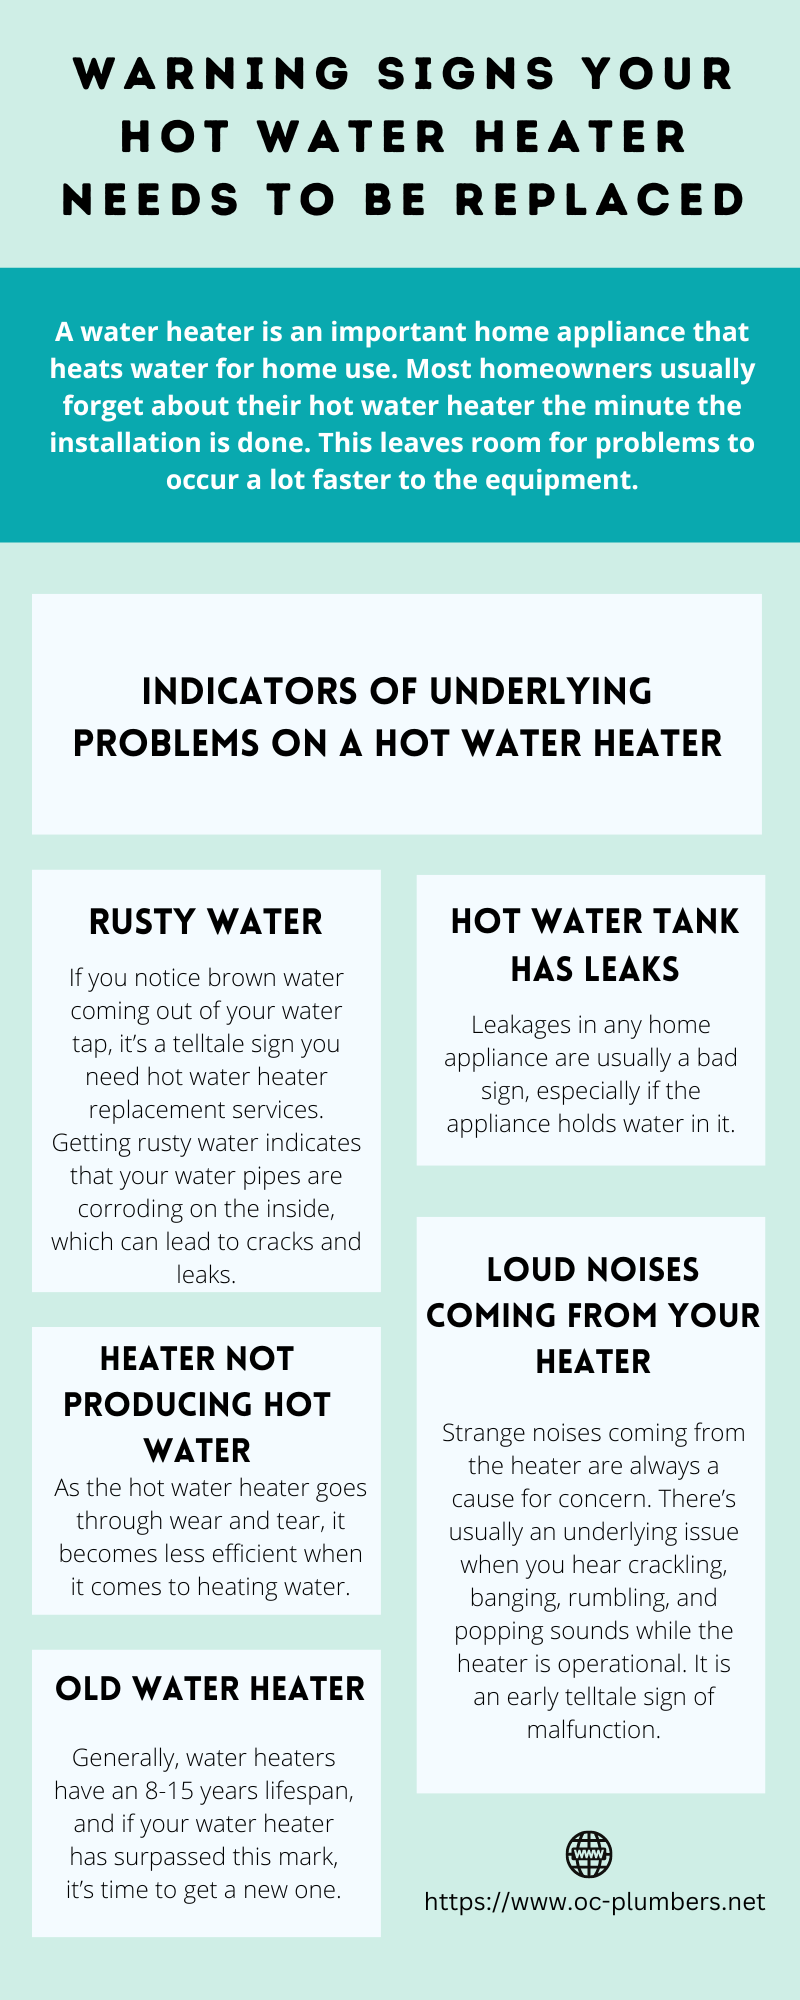 Warning Signs Your Hot Water Heater Needs to Be Replaced